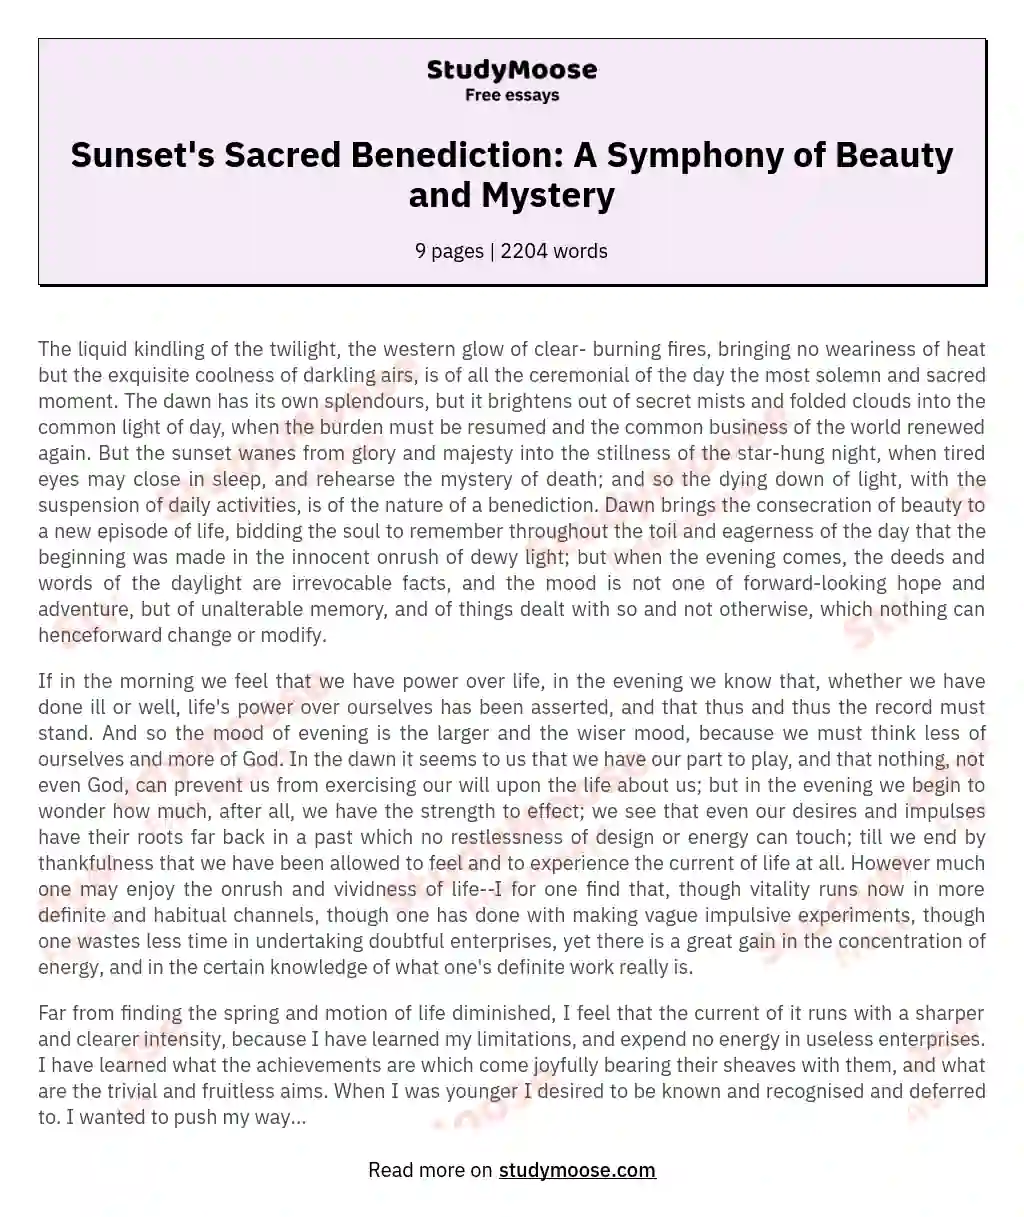 Sunset's Sacred Benediction: A Symphony of Beauty and Mystery essay